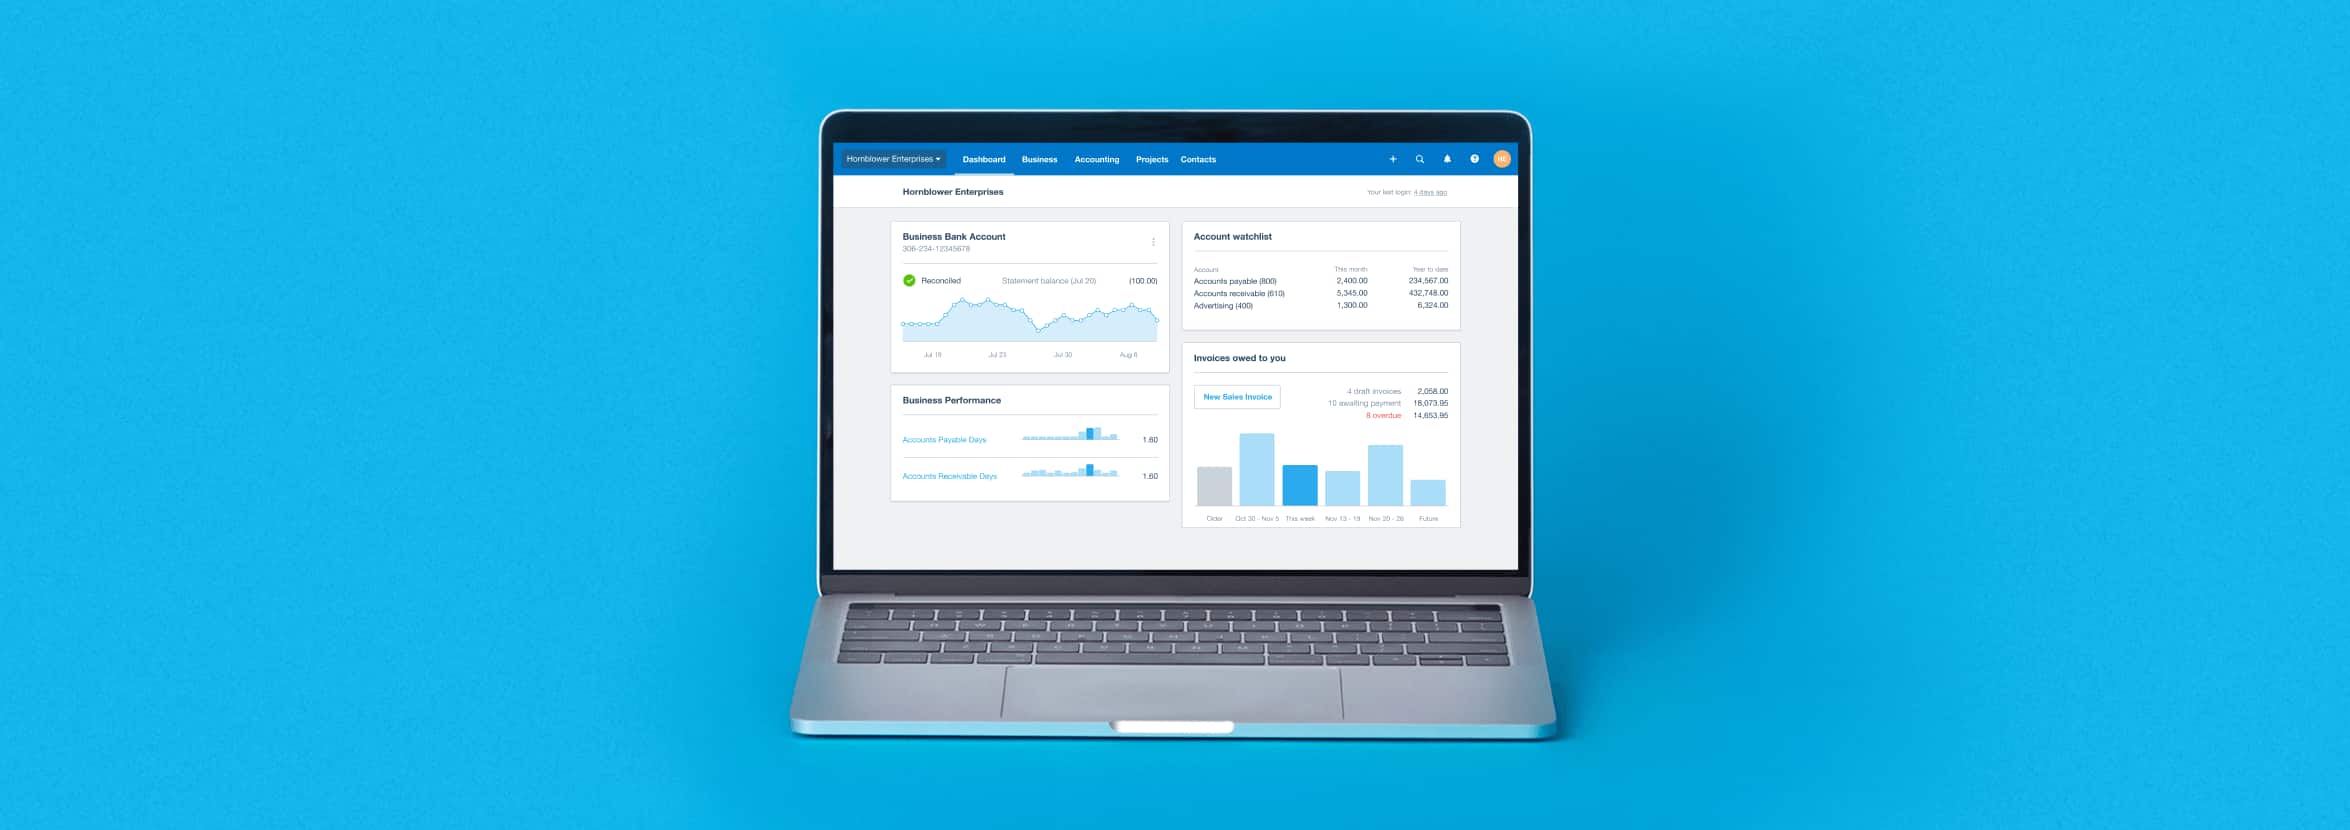 A client’s Xero dashboard displays on a laptop when Xero is opened, ready for an accountant or bookkeeper to start work.